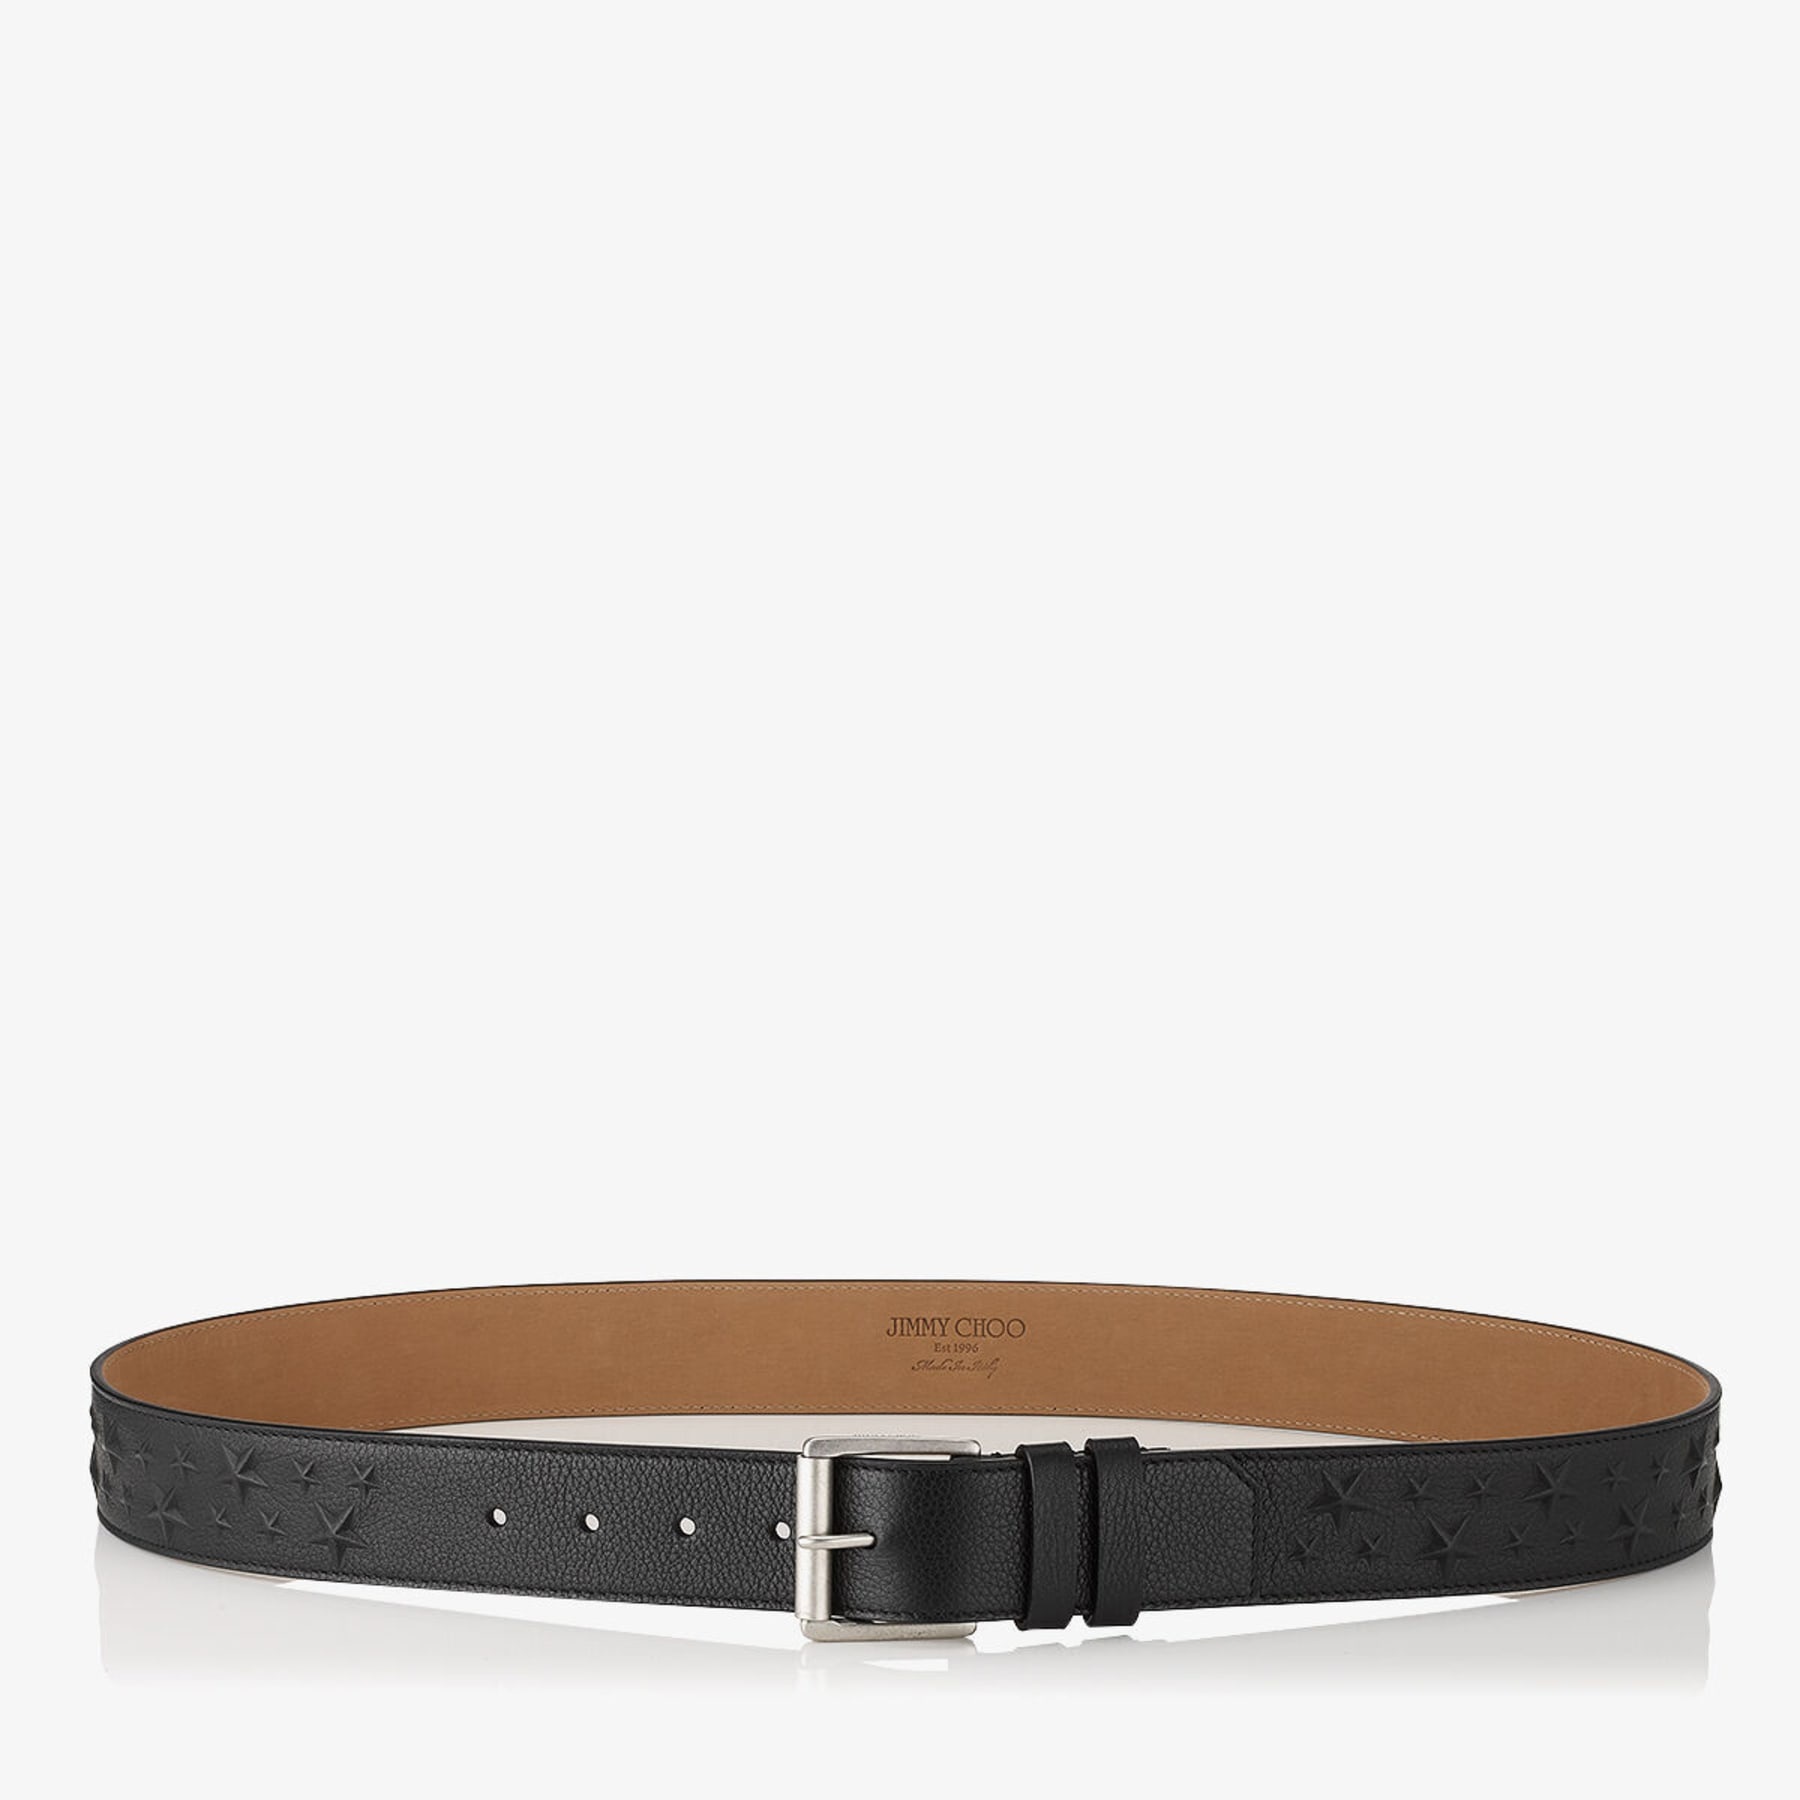 Archer
Black Grainy Leather Belt with Embossed Stars - 1